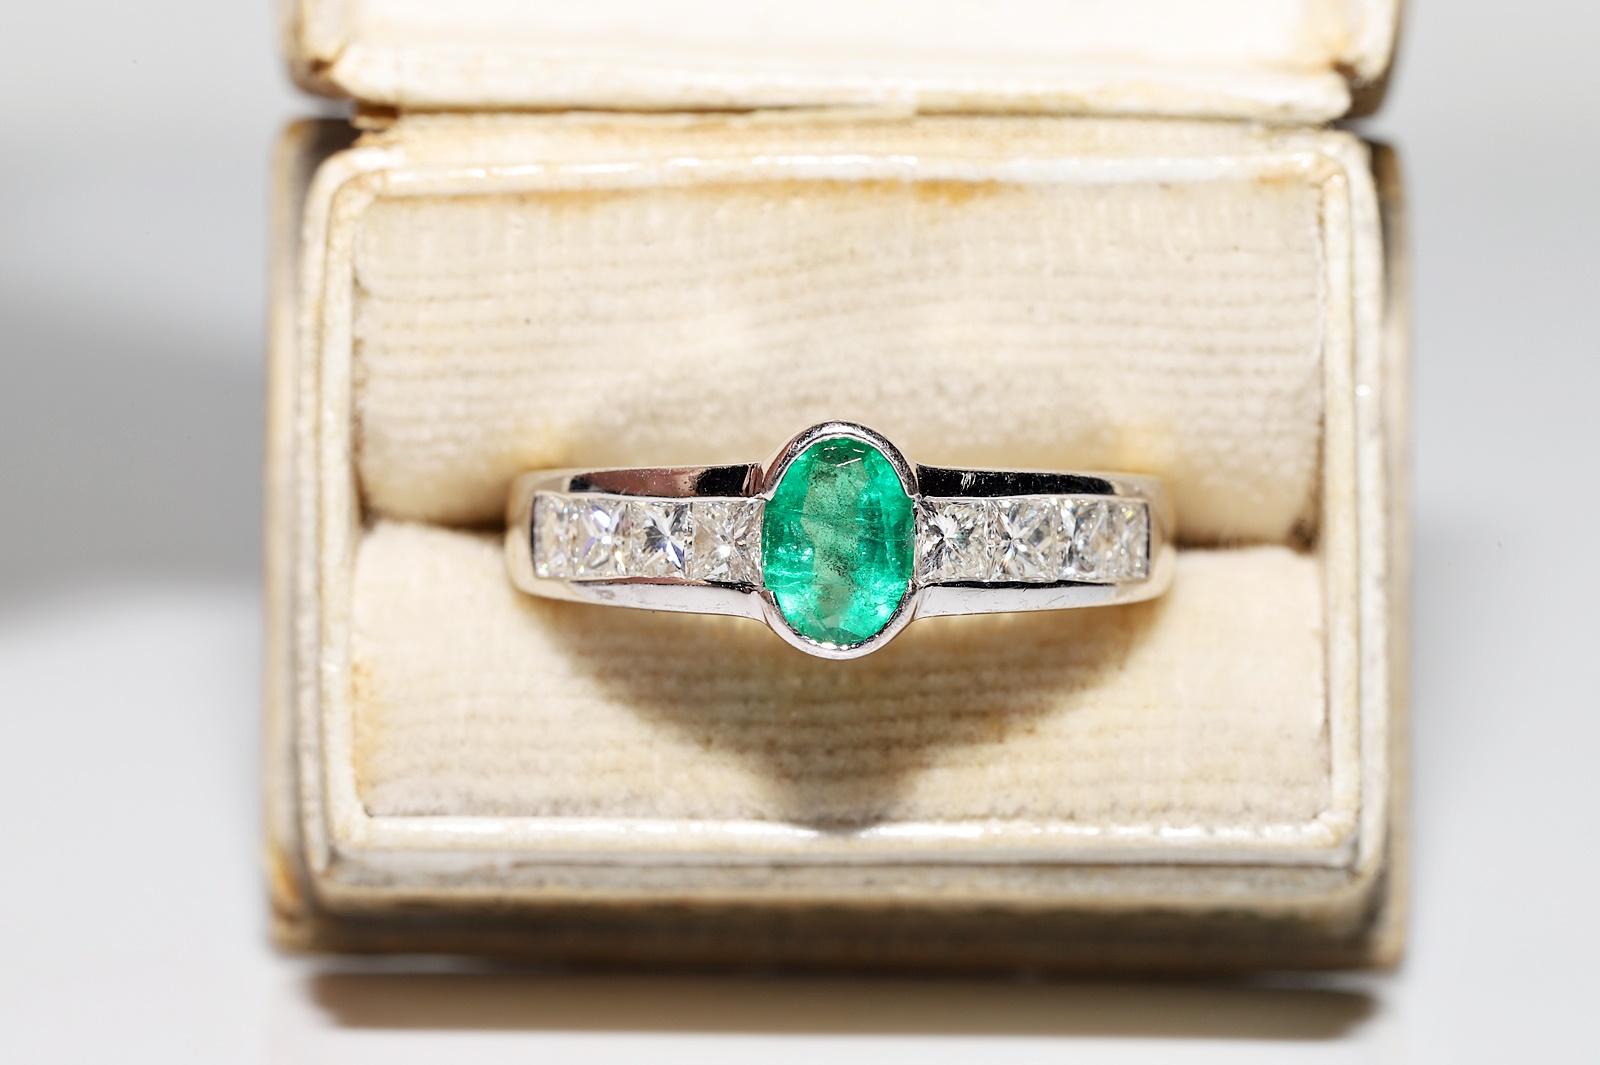 Vintage Circa 1990s 18K Gold Natural Princess Cut Diamond And  Emerald Ring  In Good Condition For Sale In Fatih/İstanbul, 34